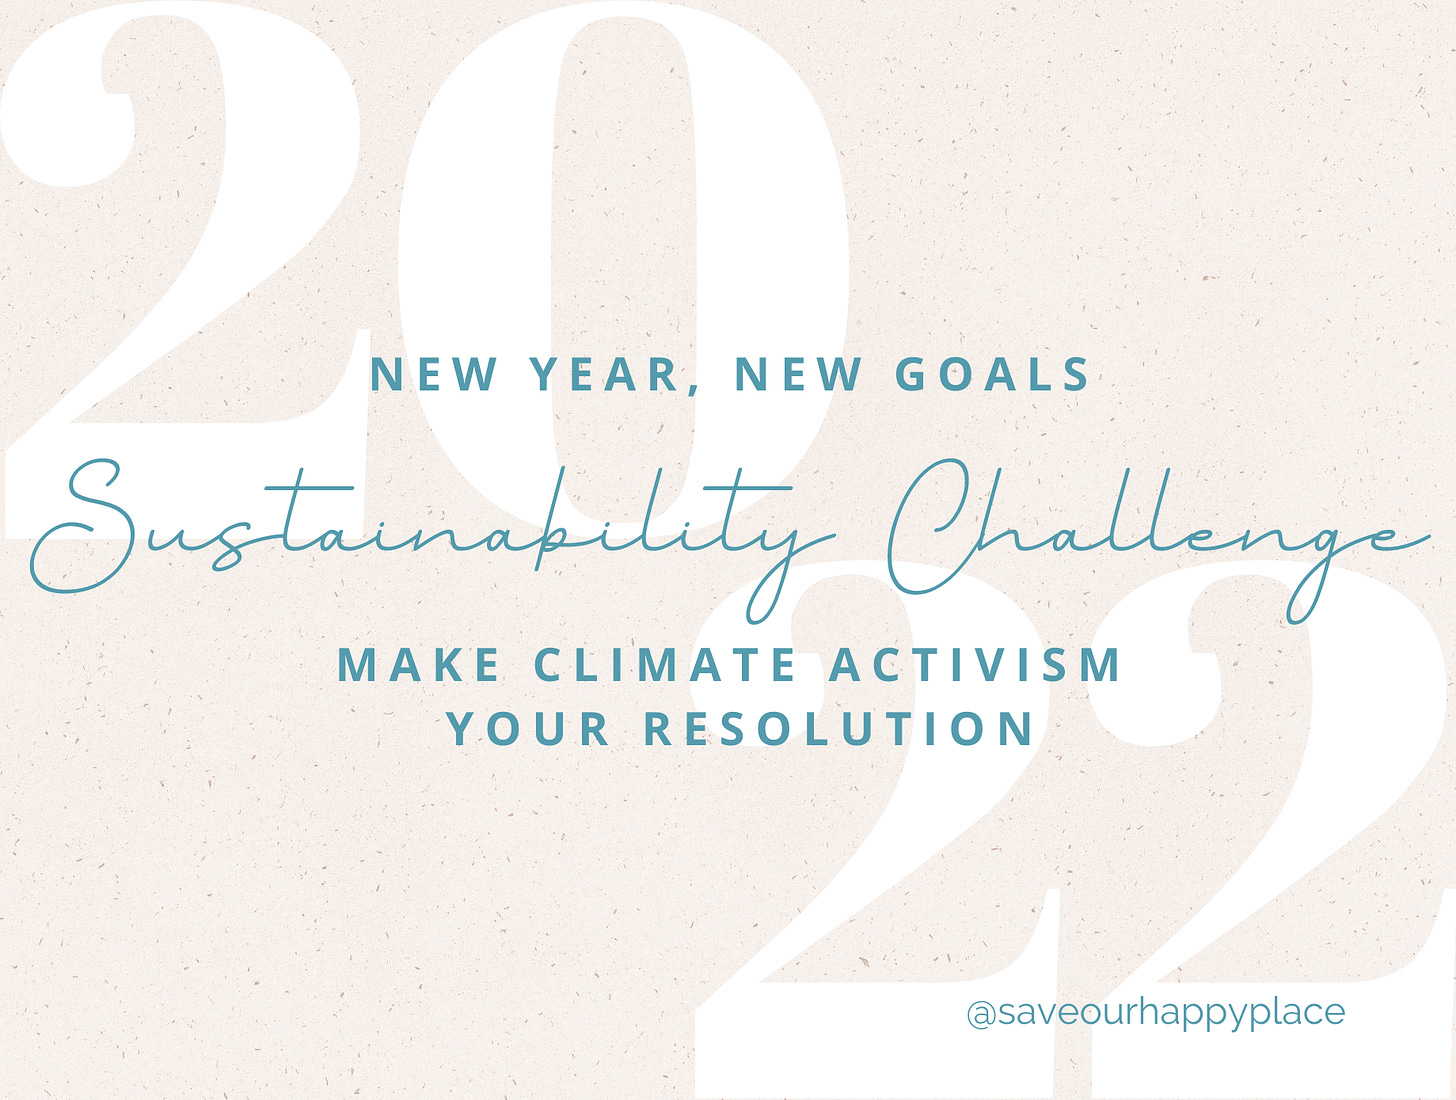 2022 New Year, New Goals: Sustainability Challenge - Make Climate Activism Your Resolution. @saveourhappyplace